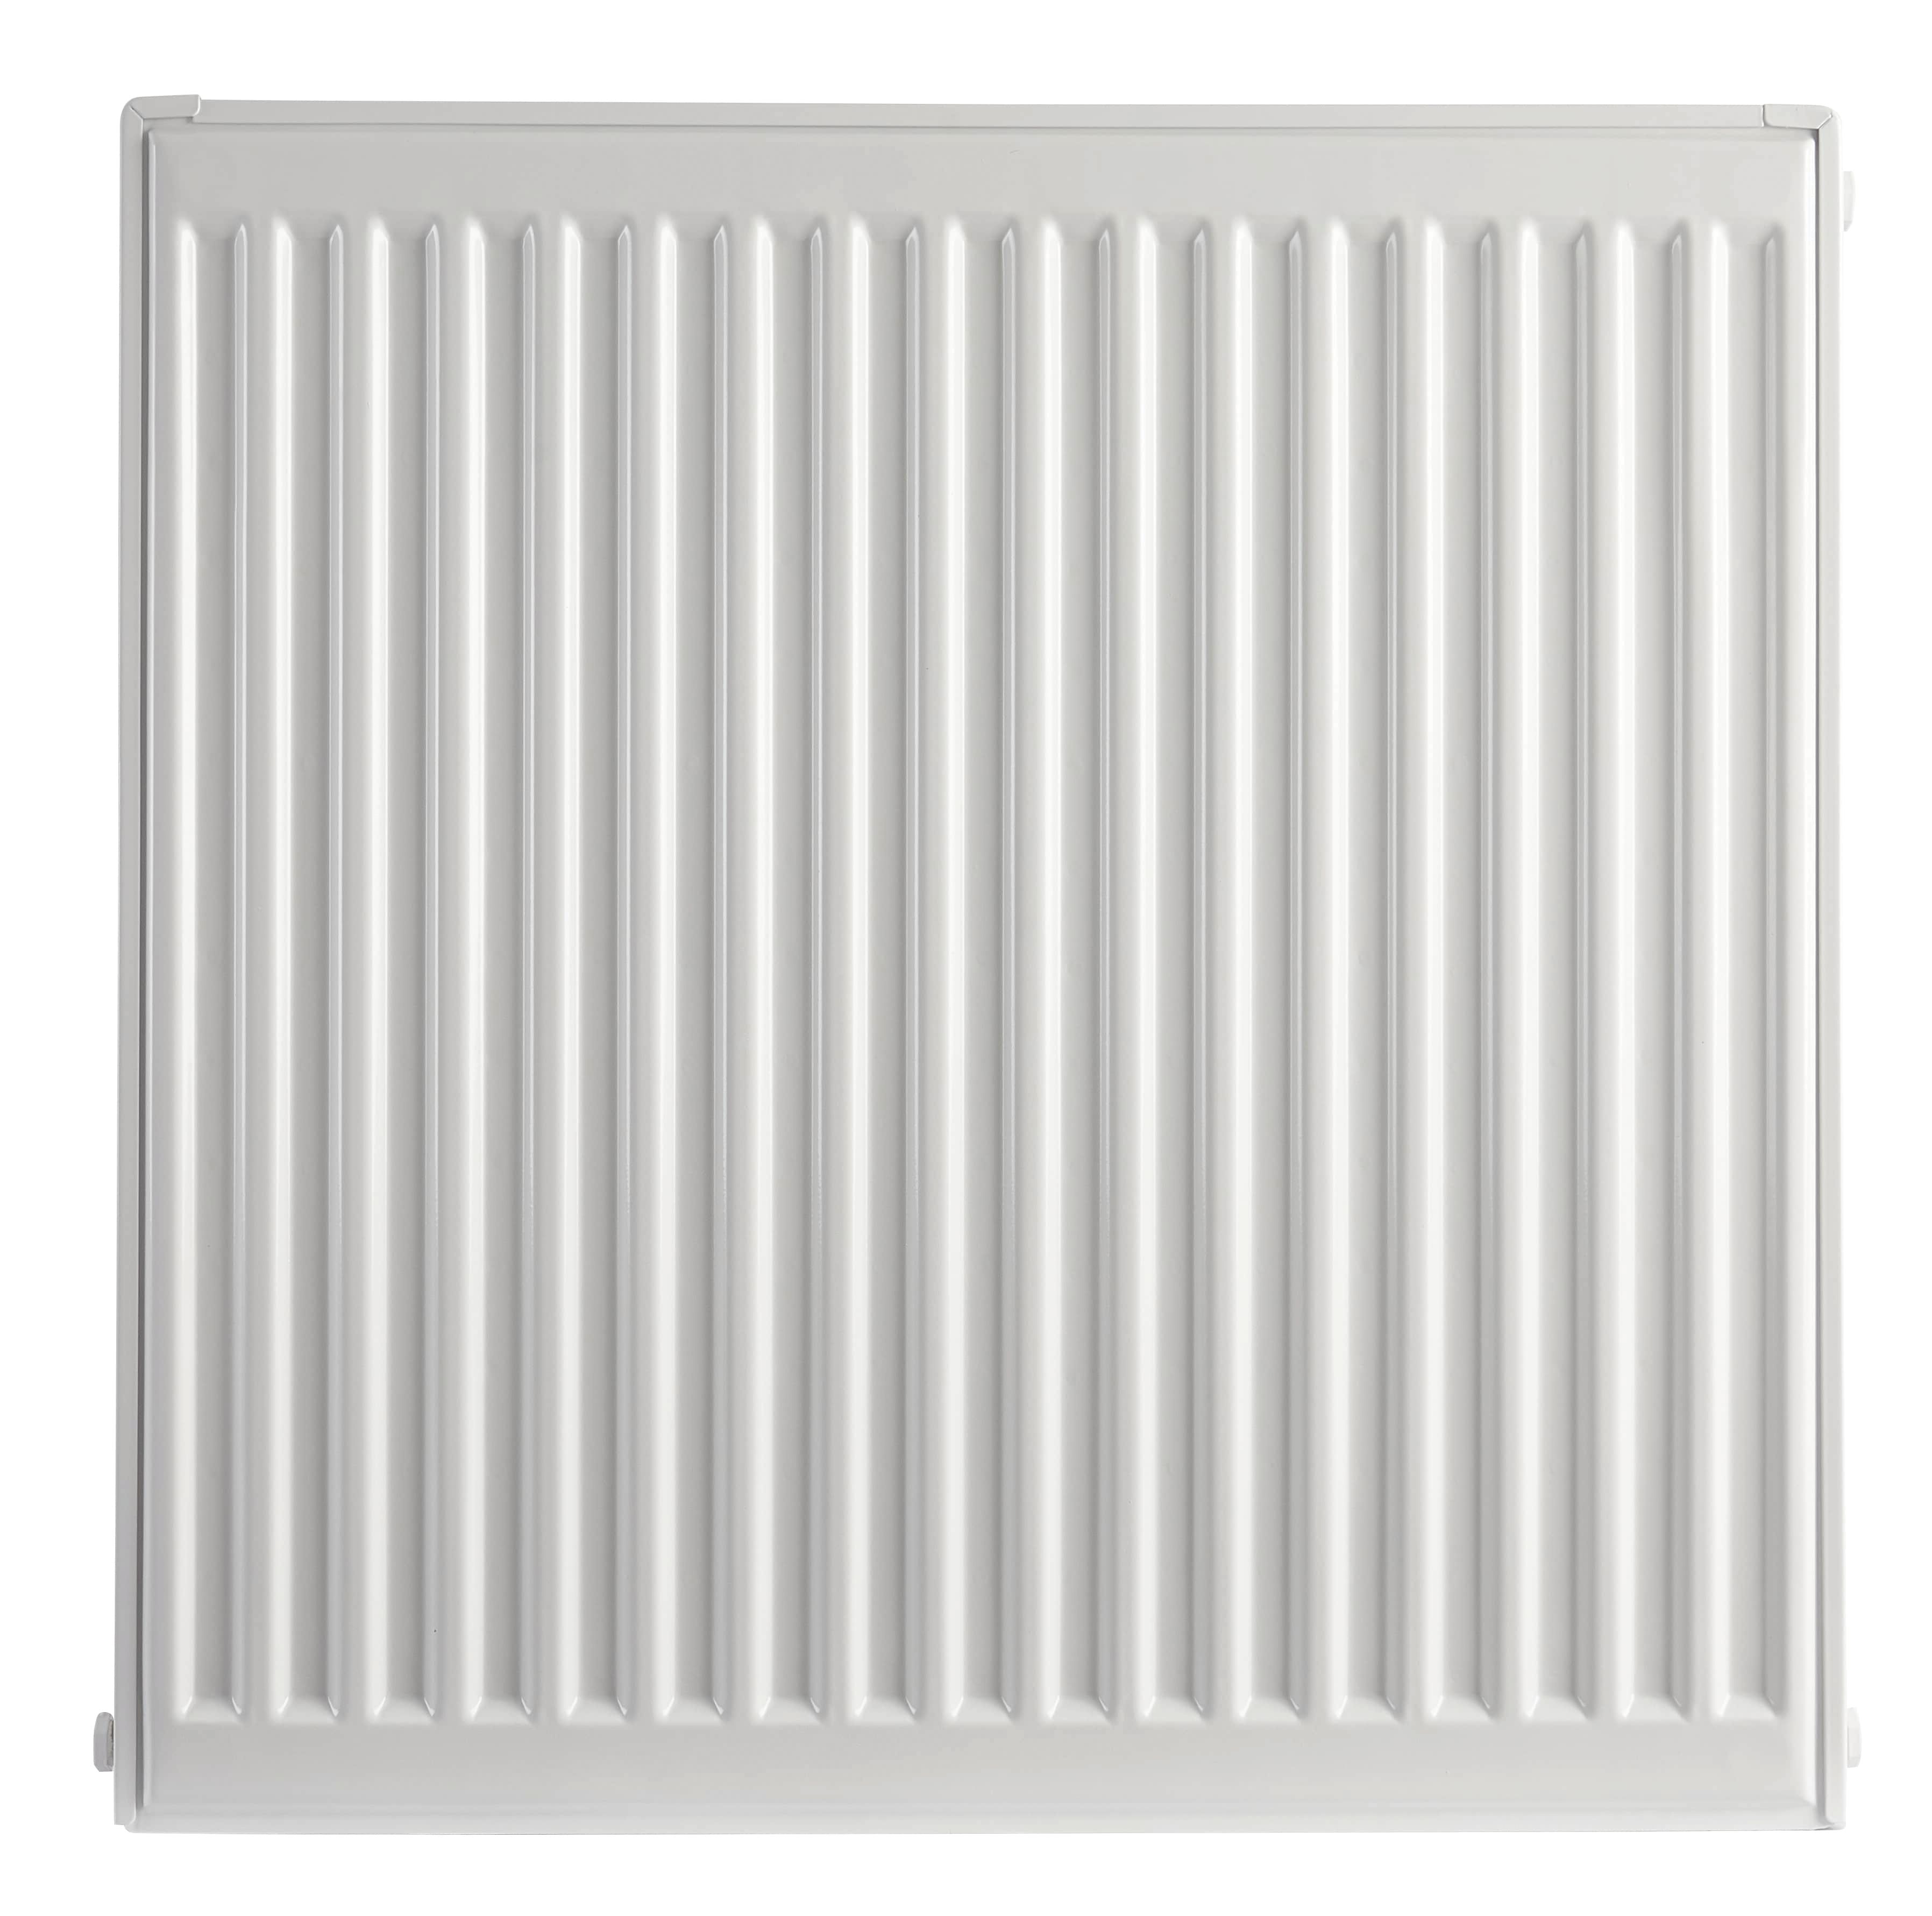 Image of Homeline by Stelrad 500 x 400mm Type 22 Double Panel Premium Double Convector Radiator